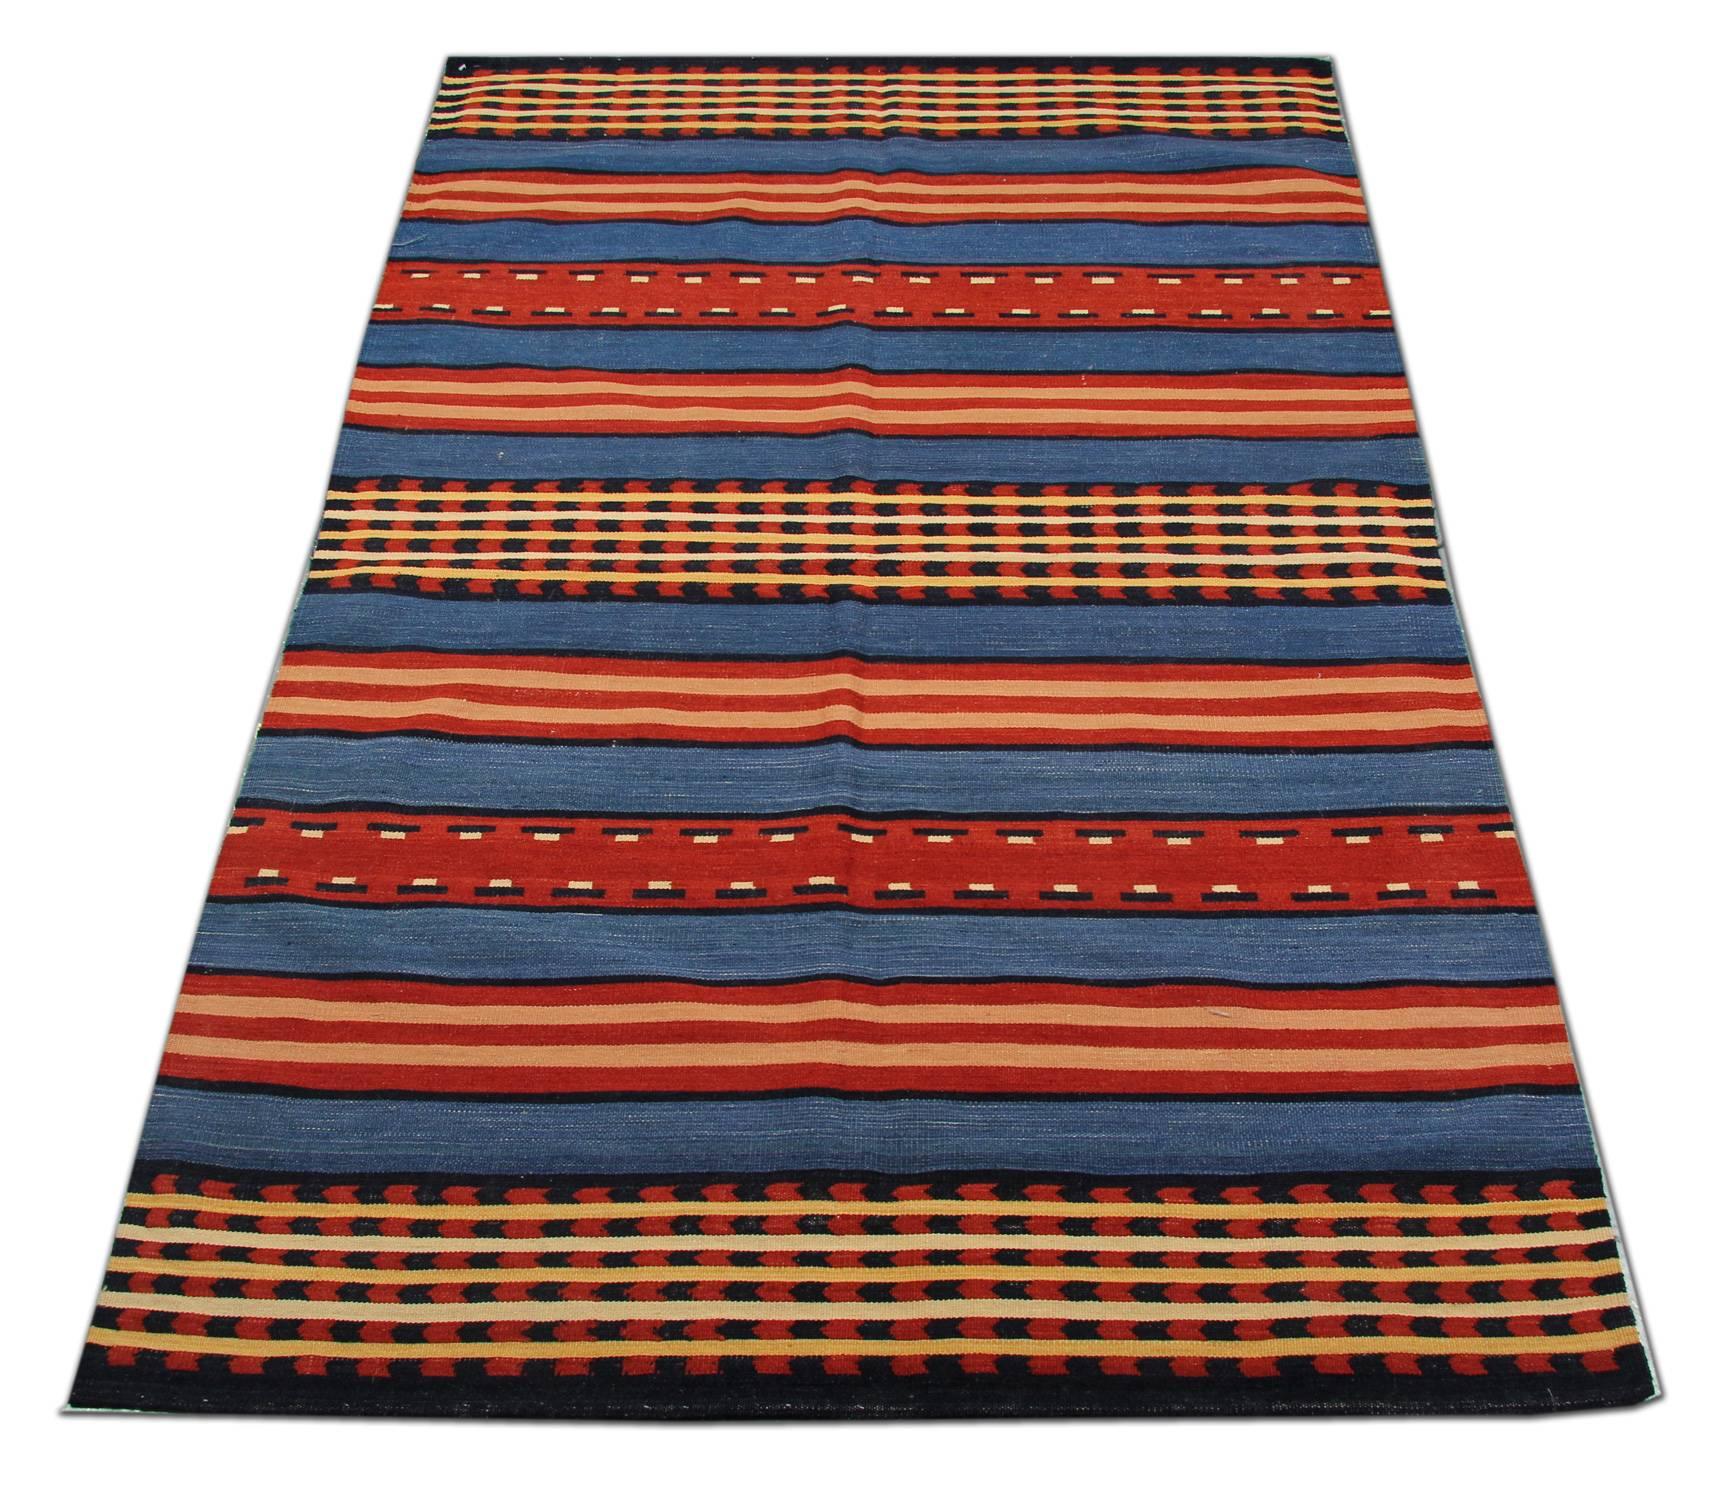 This fantastic wool rug is a handwoven Kilim constructed in Afghanistan, 1999. It features a simple yet eye-catching stripe design with colors of white, blue and beige. The simple stripe design has been woven with geometric pattern through our